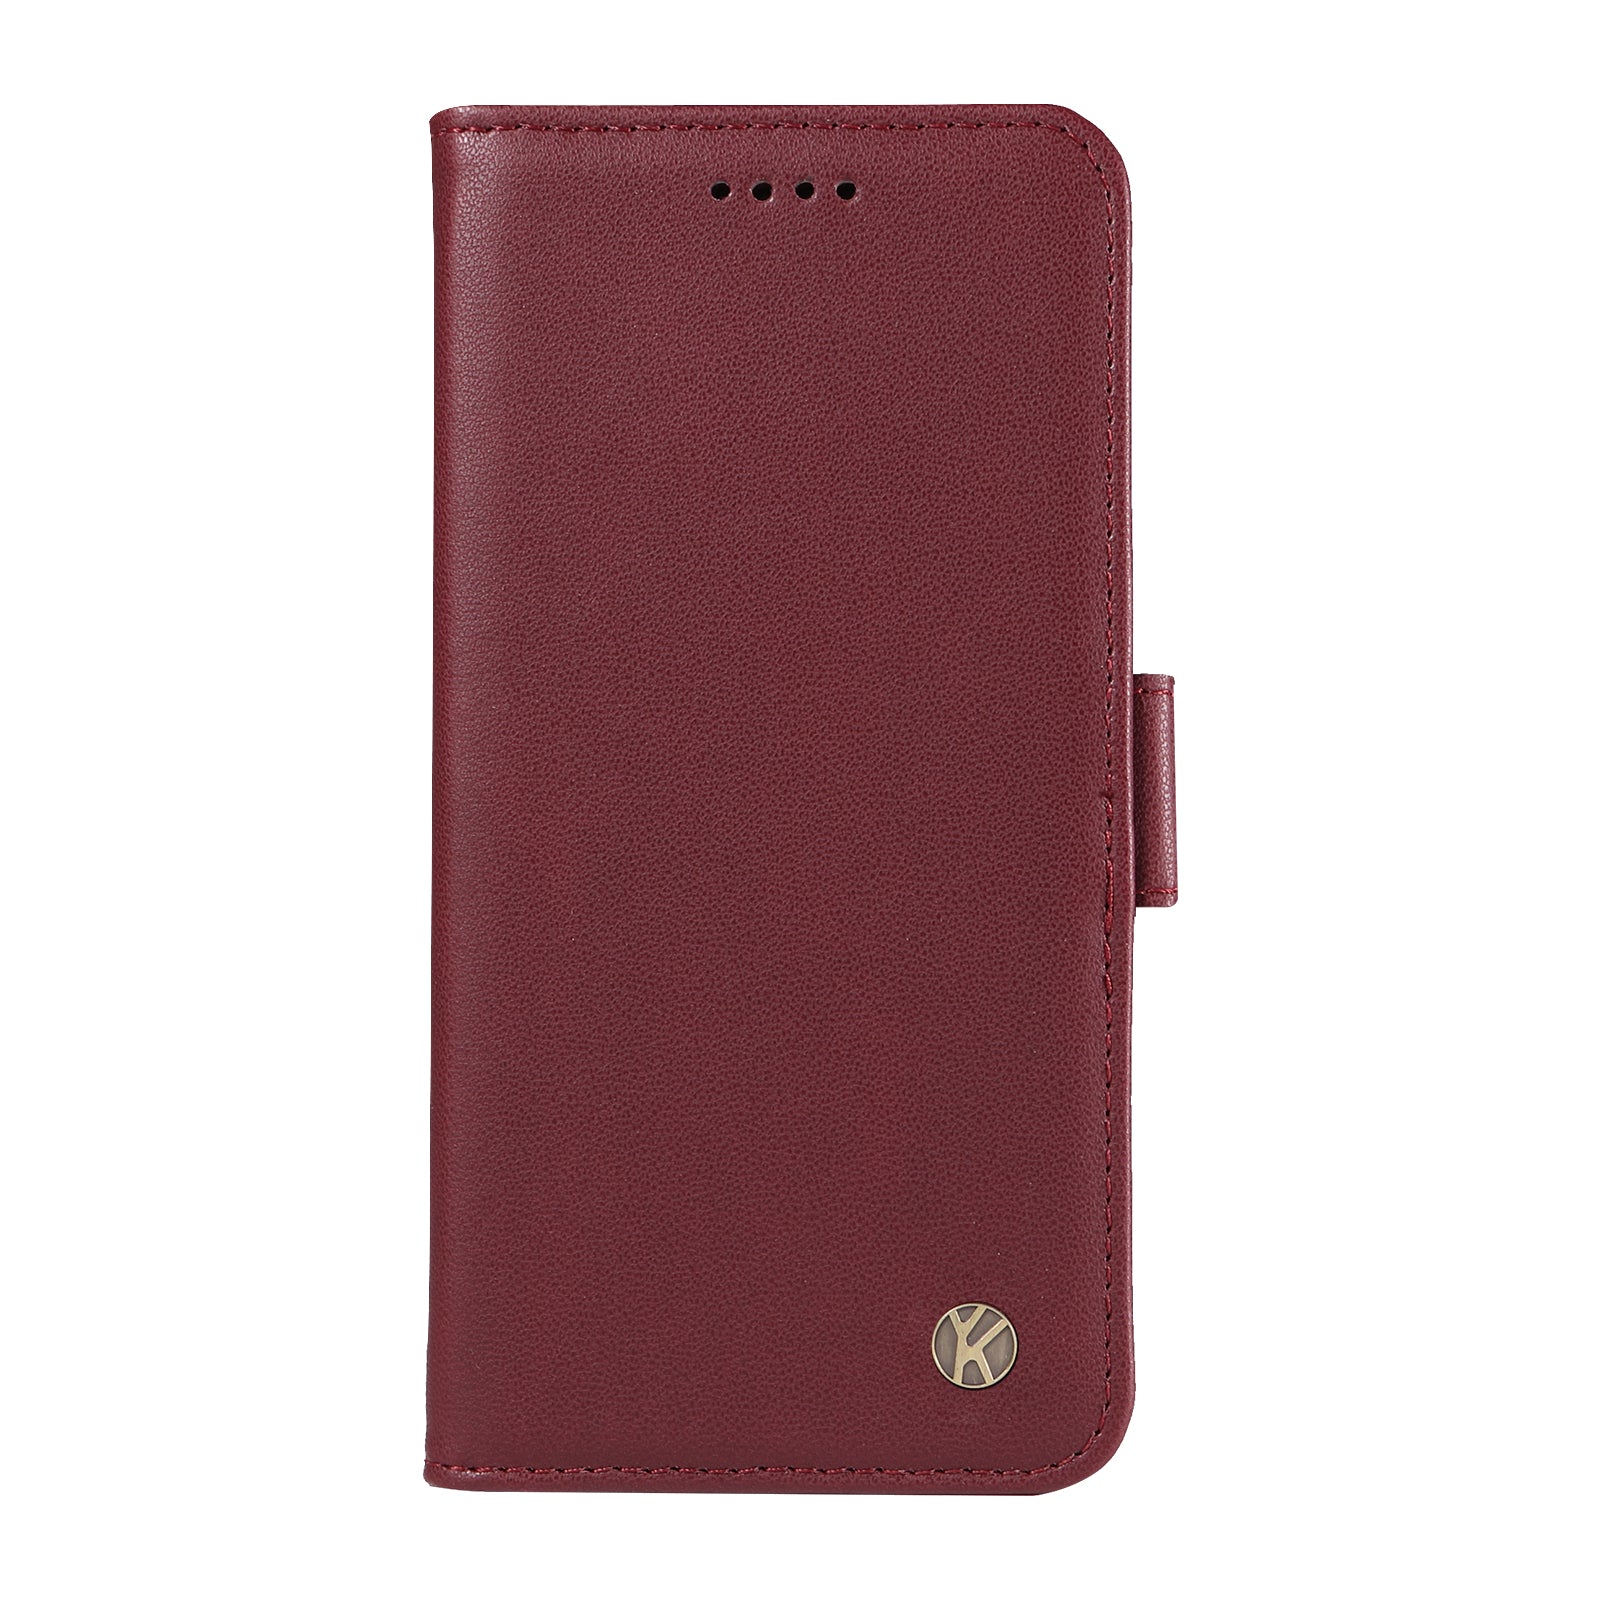 YIKATU YK-003 For Realme 12+ 5G Case Wallet PU Leather+TPU Cover Phone Accessories Distributors - Wine Red